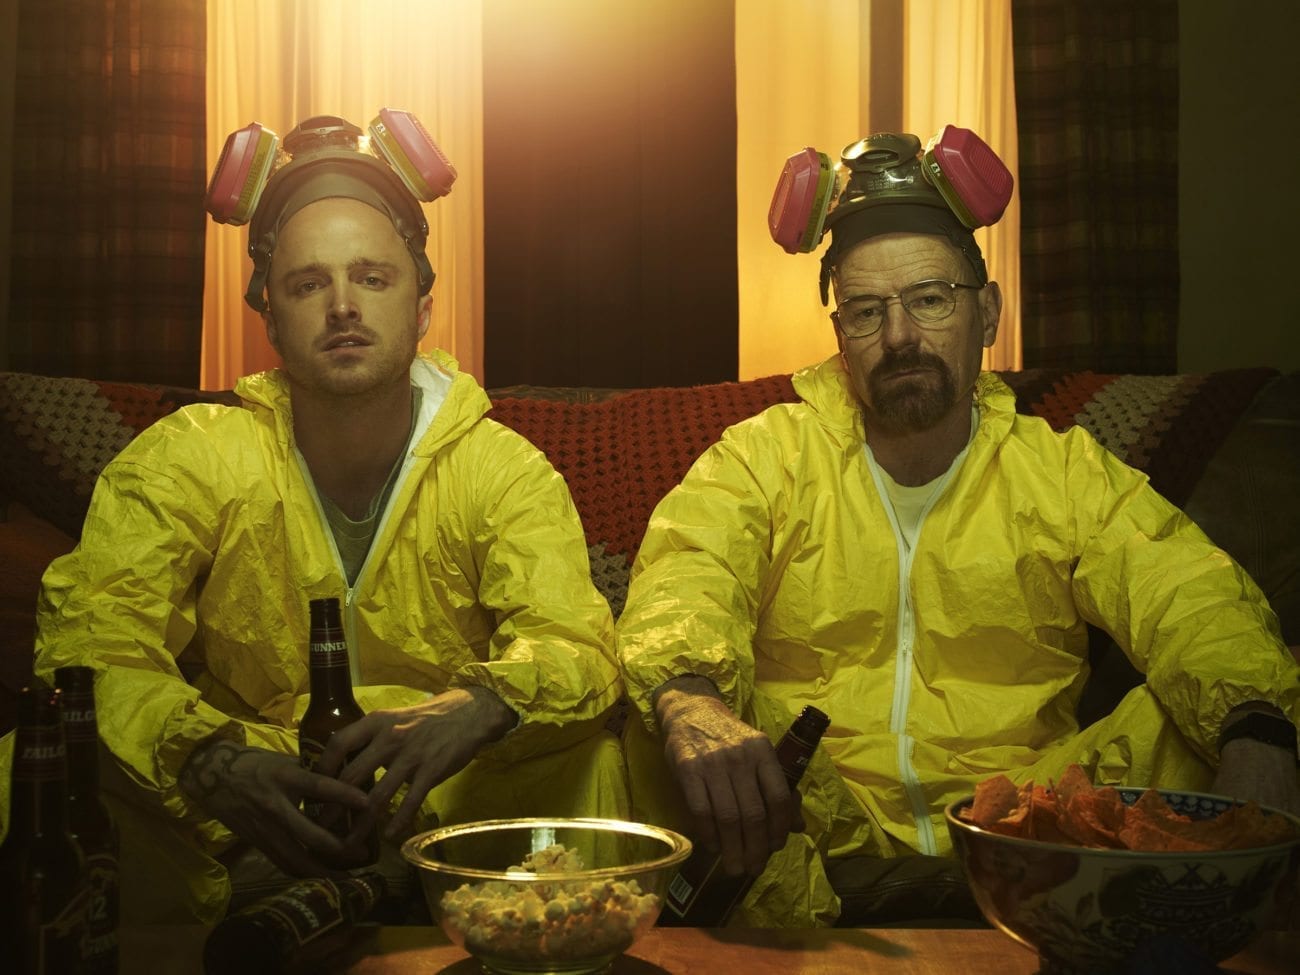 'Breaking Bad' fans will be stoked to learn Vince Gilligan is developing an AR experience with Sony PlayStation VR for a Sony platform experience.